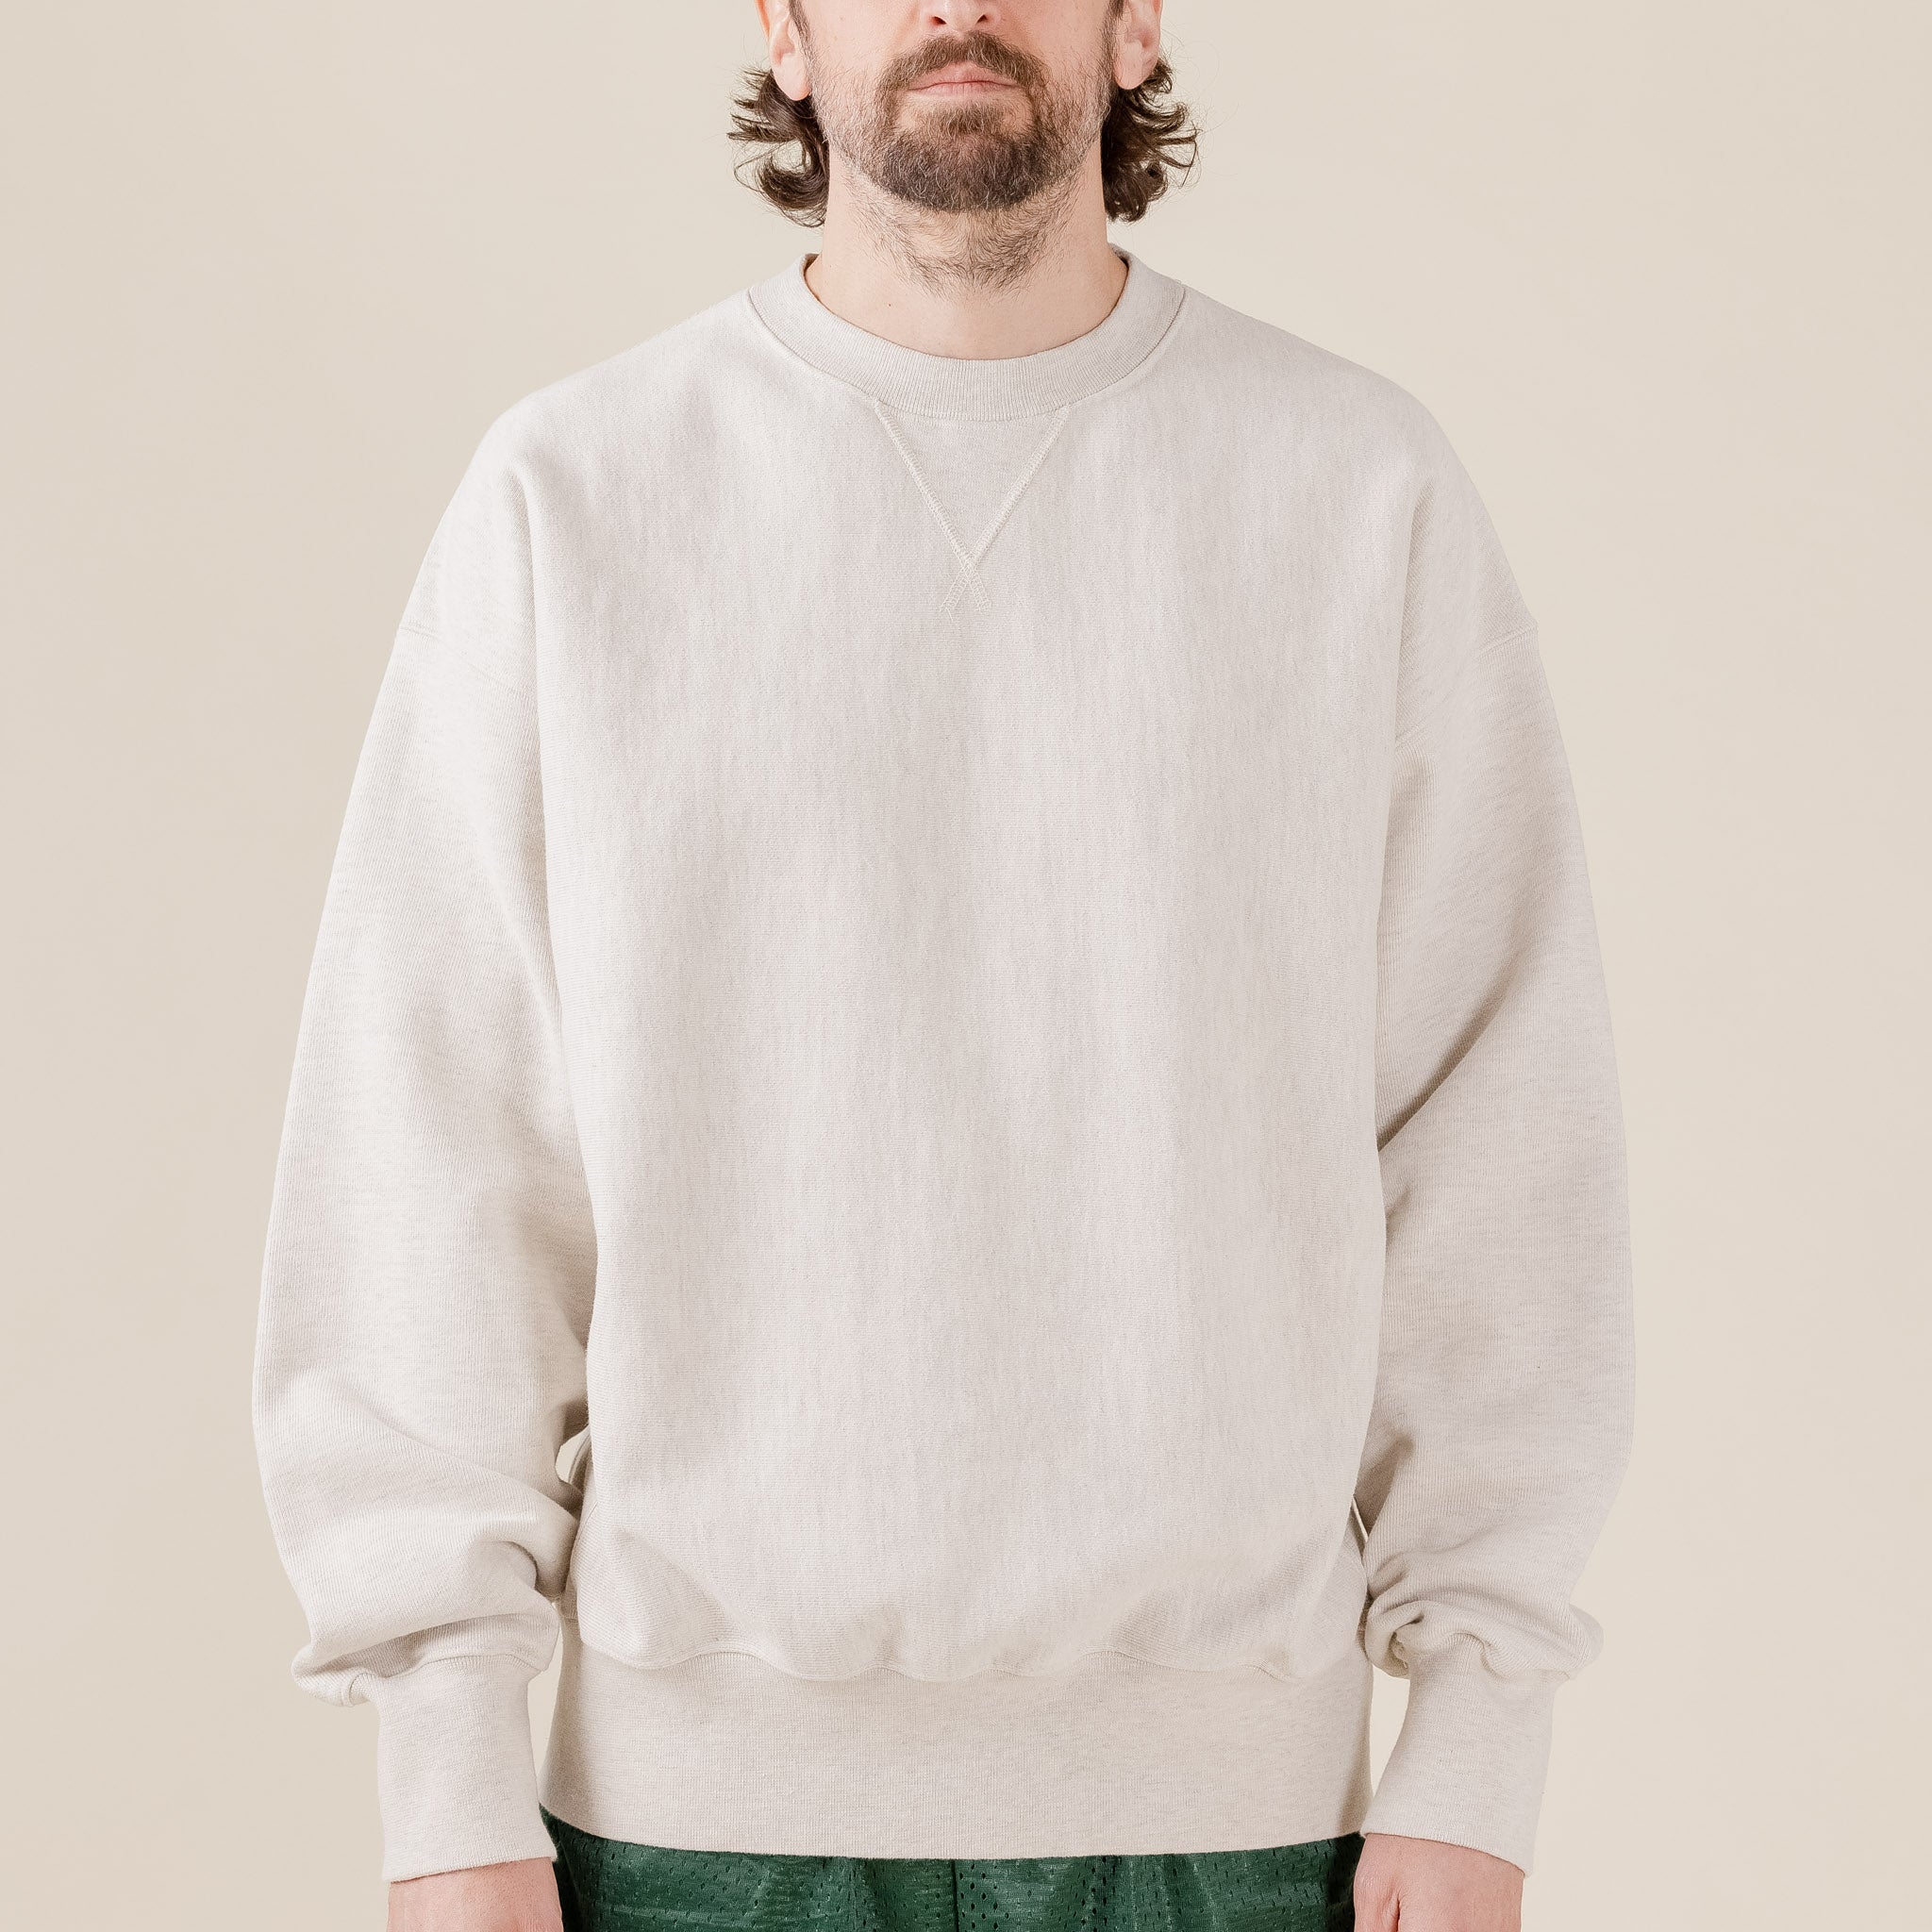 Outstanding & Co - Heavyweight Reverse Sweatshirt - 1% Oatmeal Grey "outstanding & co uk stockist" "outstanding & co" "outstanding and co" "better than camber"